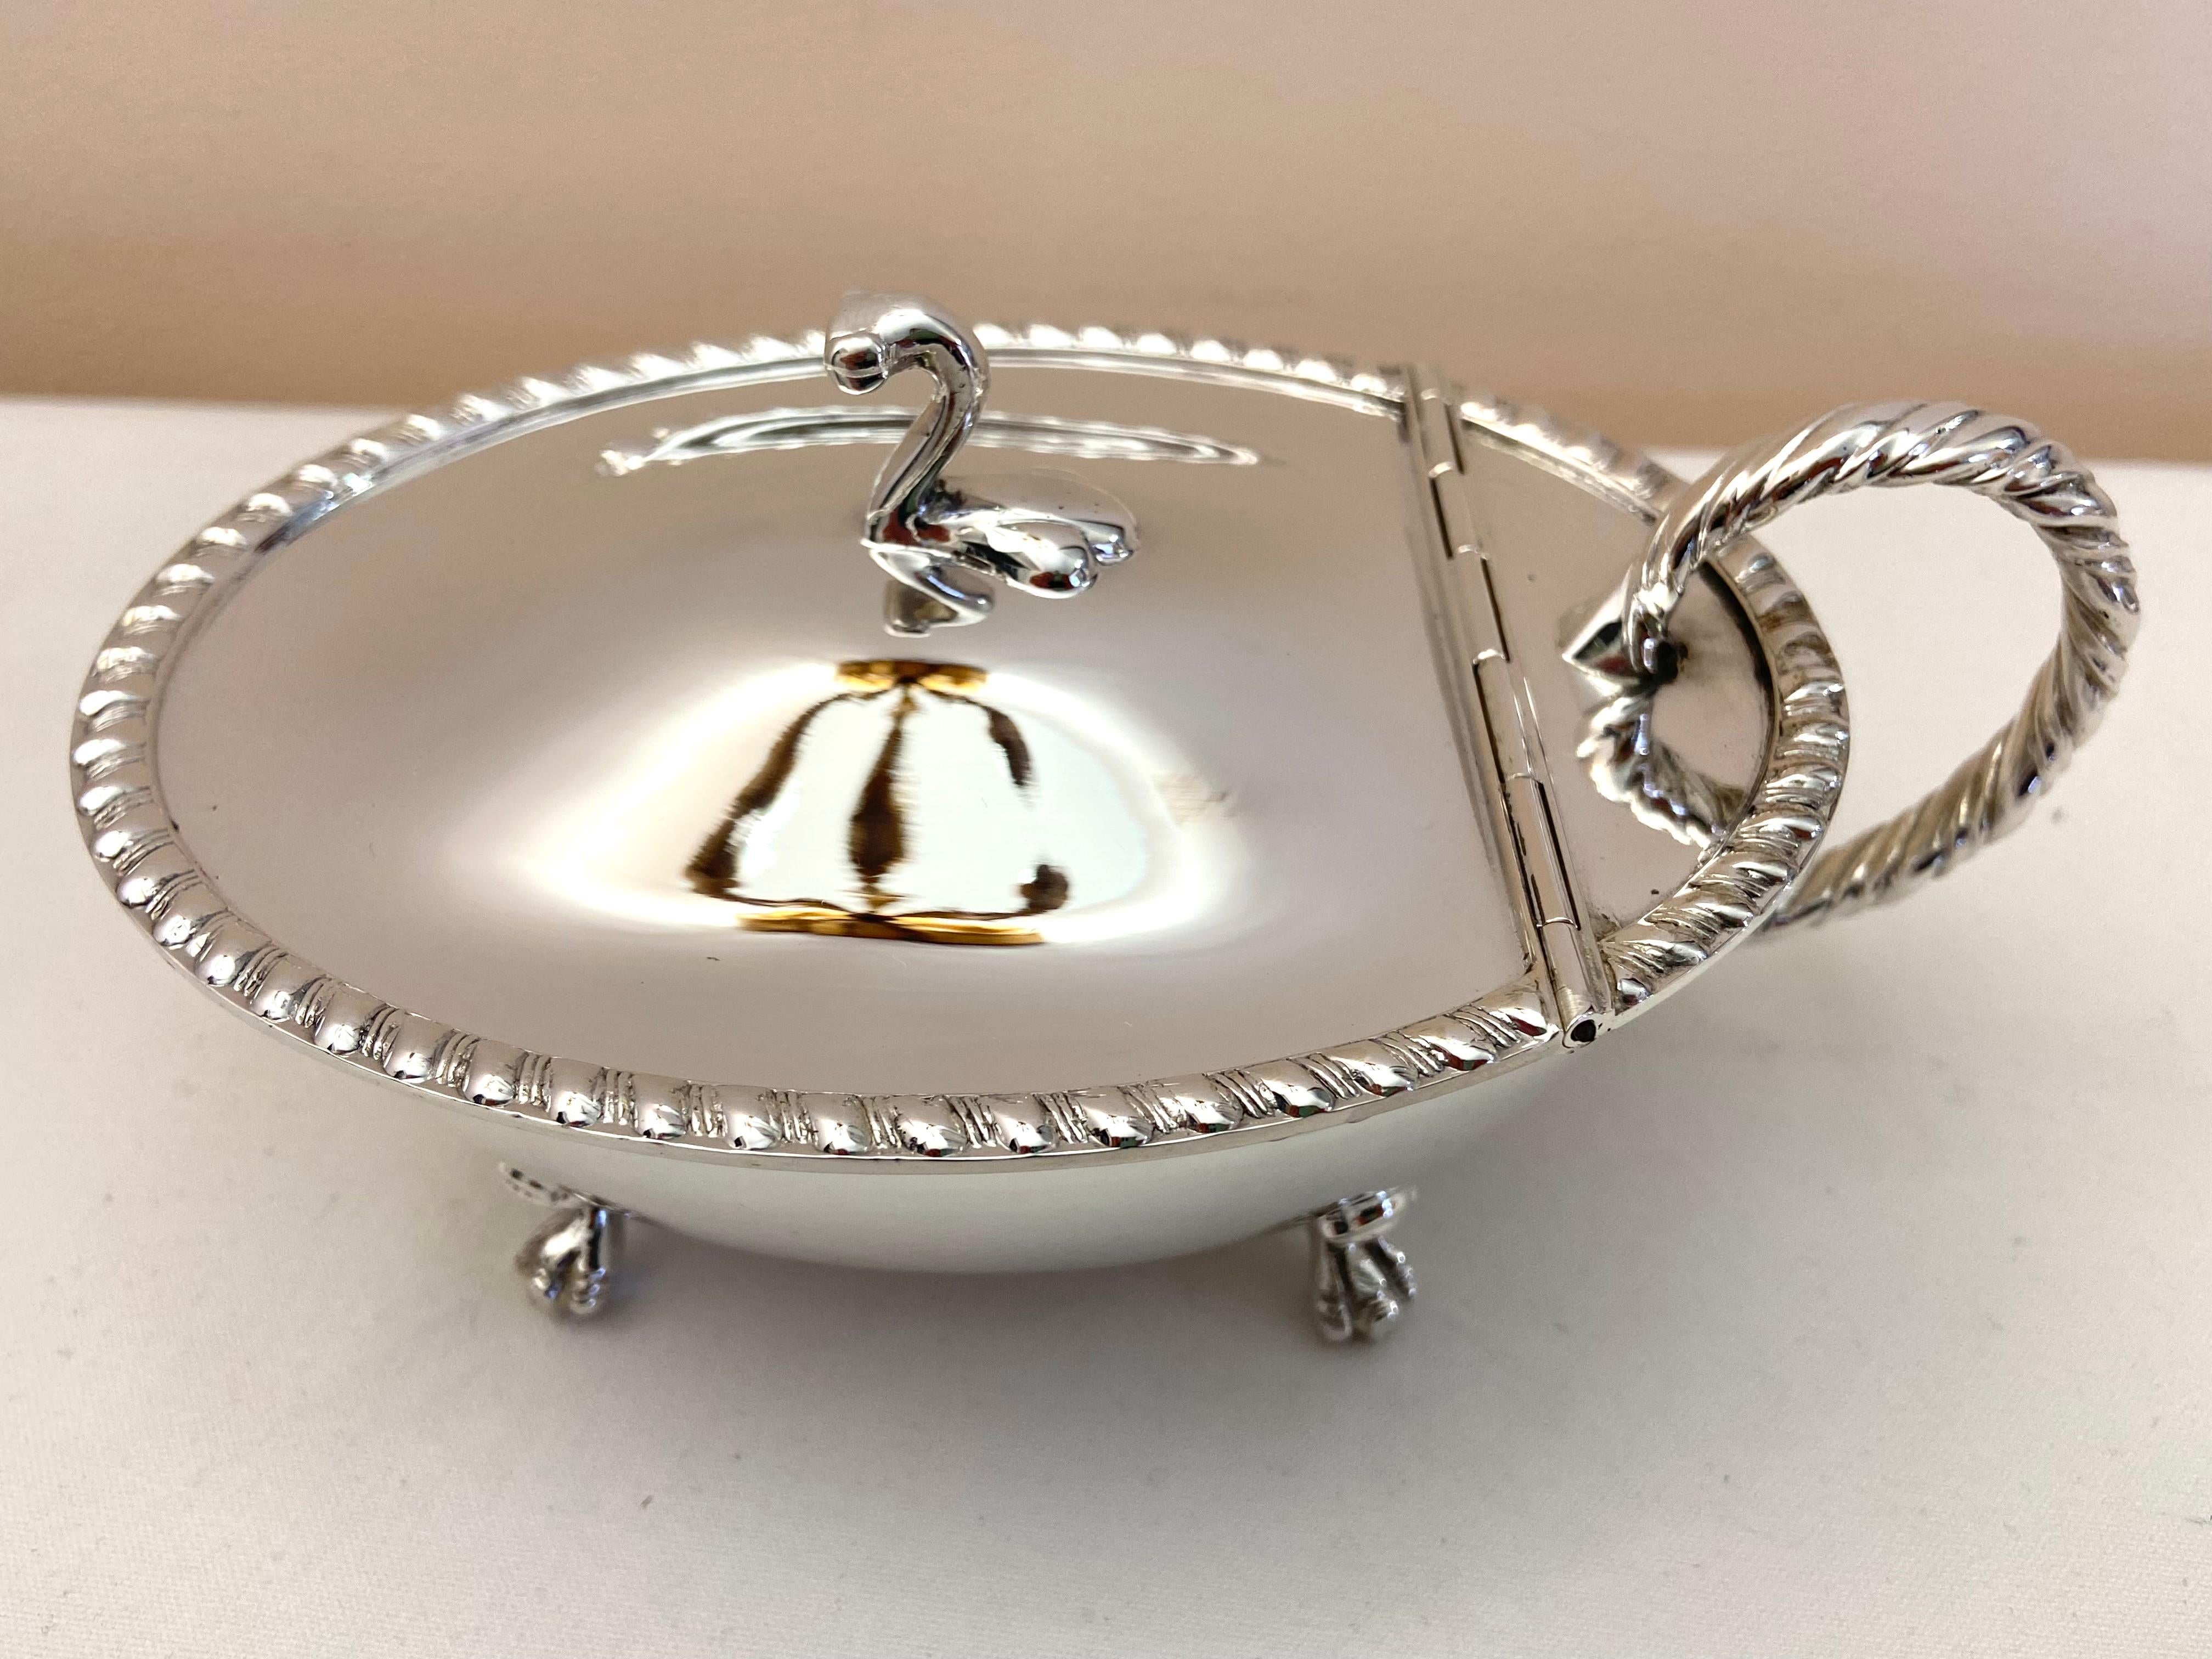 800 silver gravy boat.
At the price of pure silver gravy boat 800 thousandths.Made in Italy.
New item from my jewelry. It measures 16 cm by 11 cm. It weighs 310.00 grams. Regularly stamped with state trademarks, I ship in an elegant gift box.